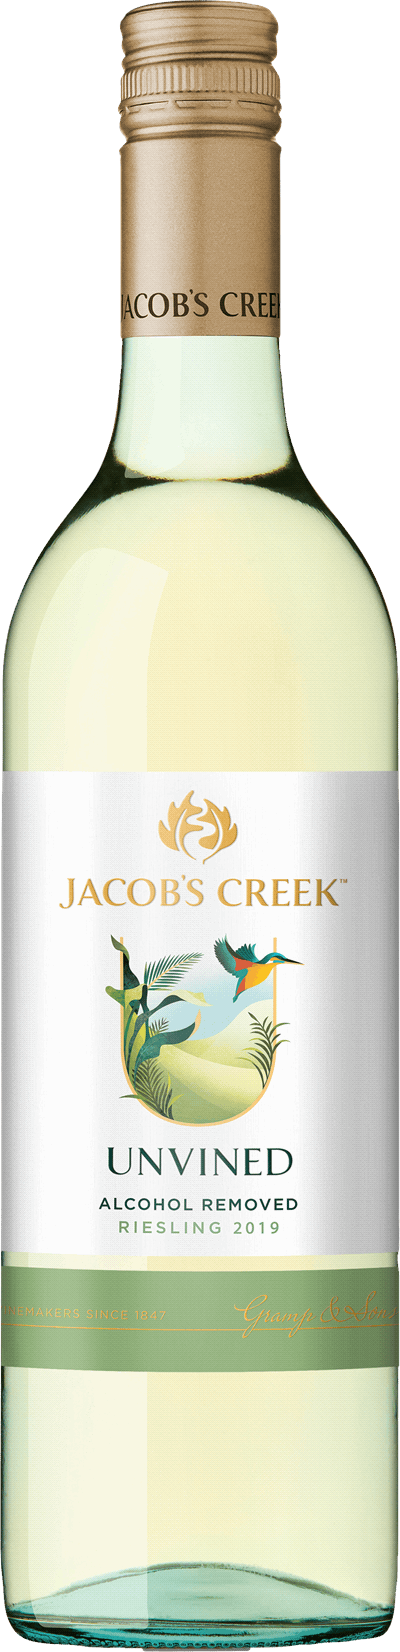 Jacob's Creek UnVined Riesling 2019